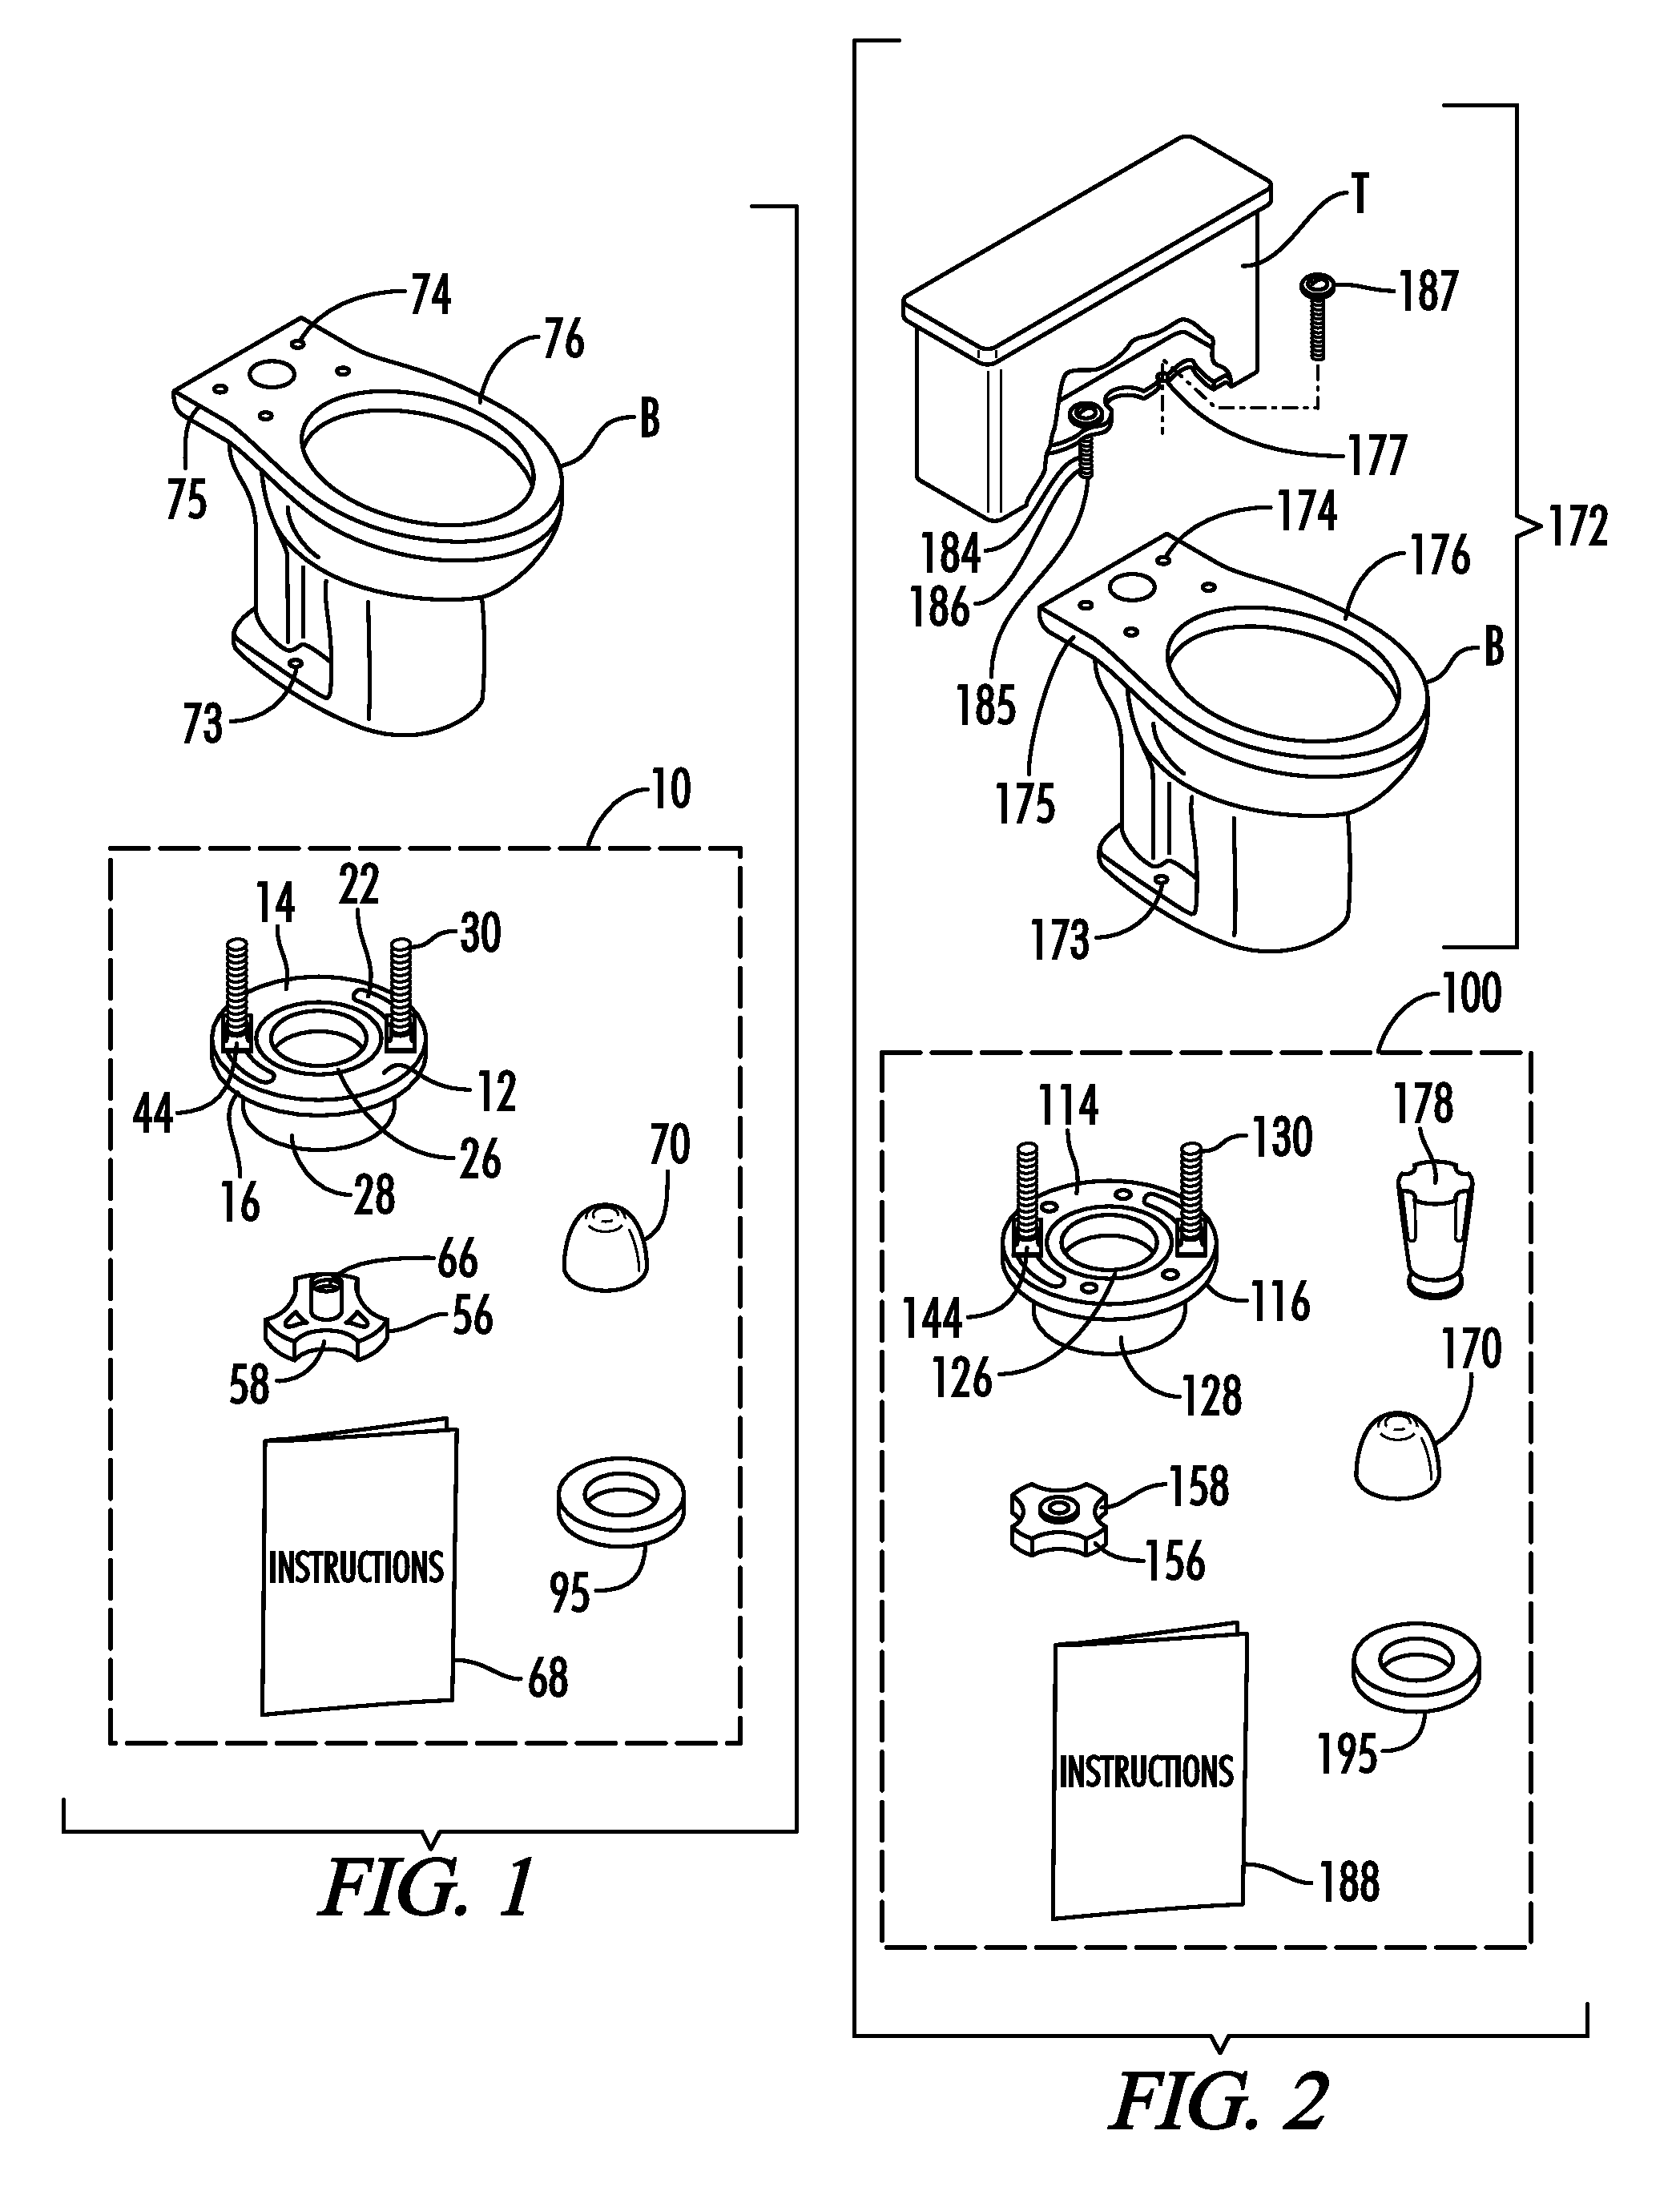 Kits, assemblies and methods for no-tools toilet installation